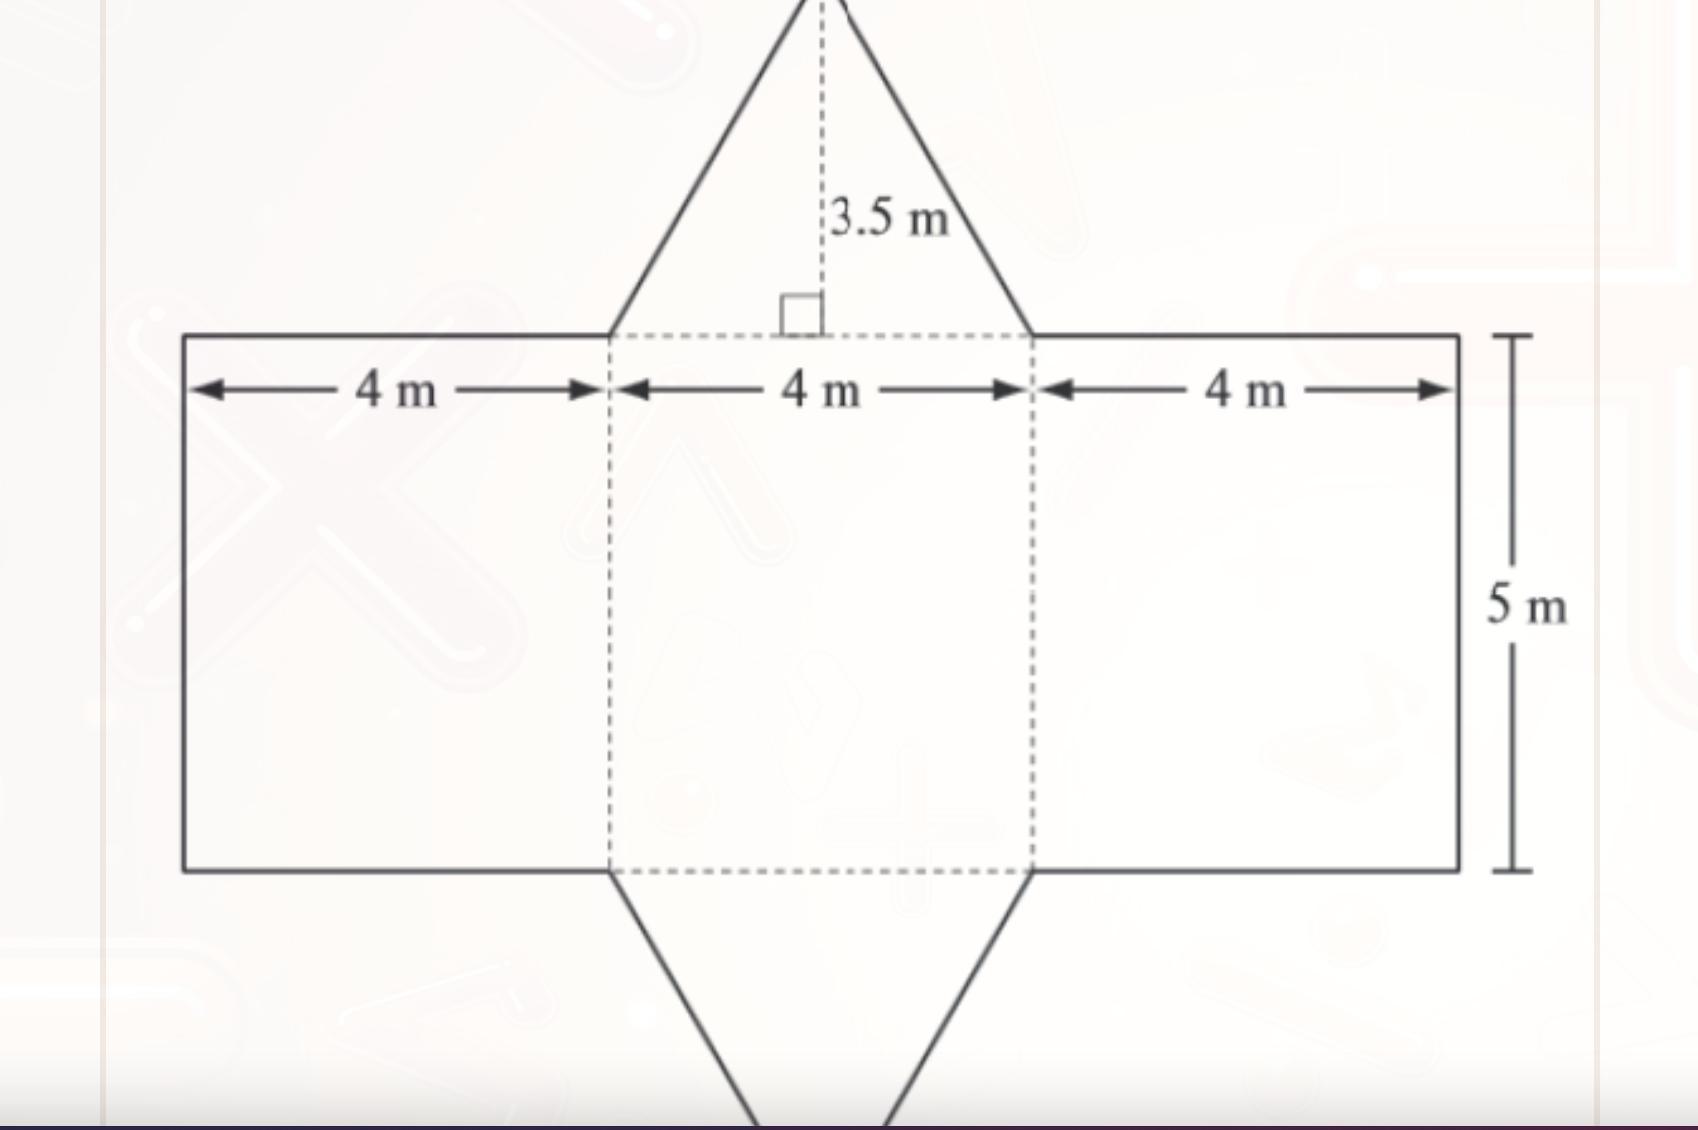 surface area of a triangular prism net